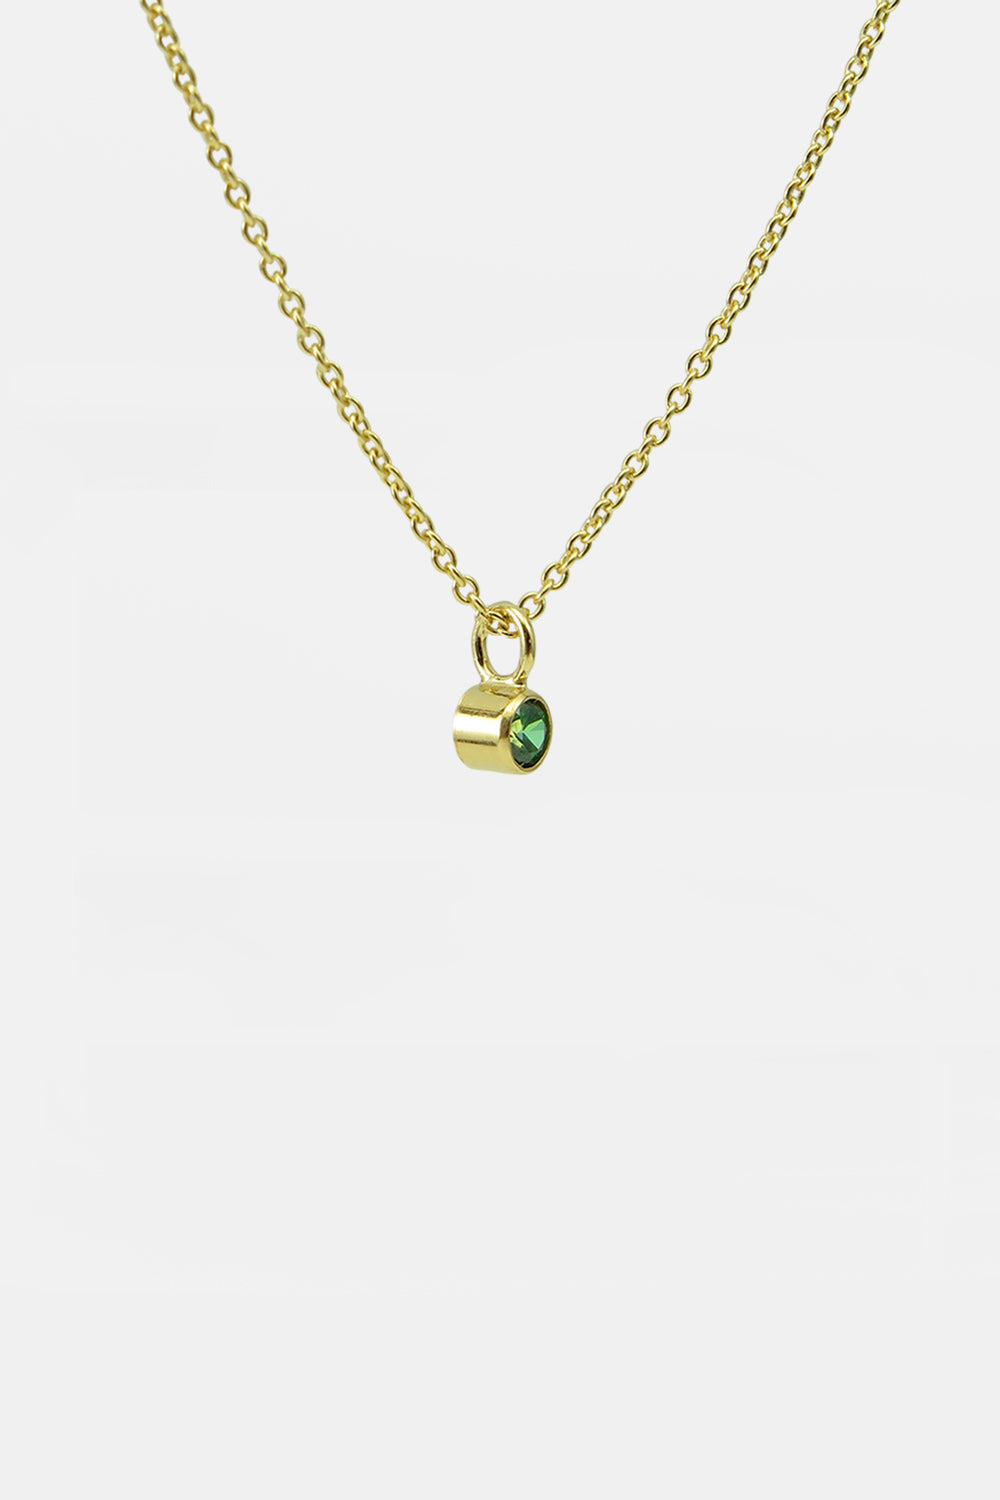 Anchorchain with blue, green or champagne stone